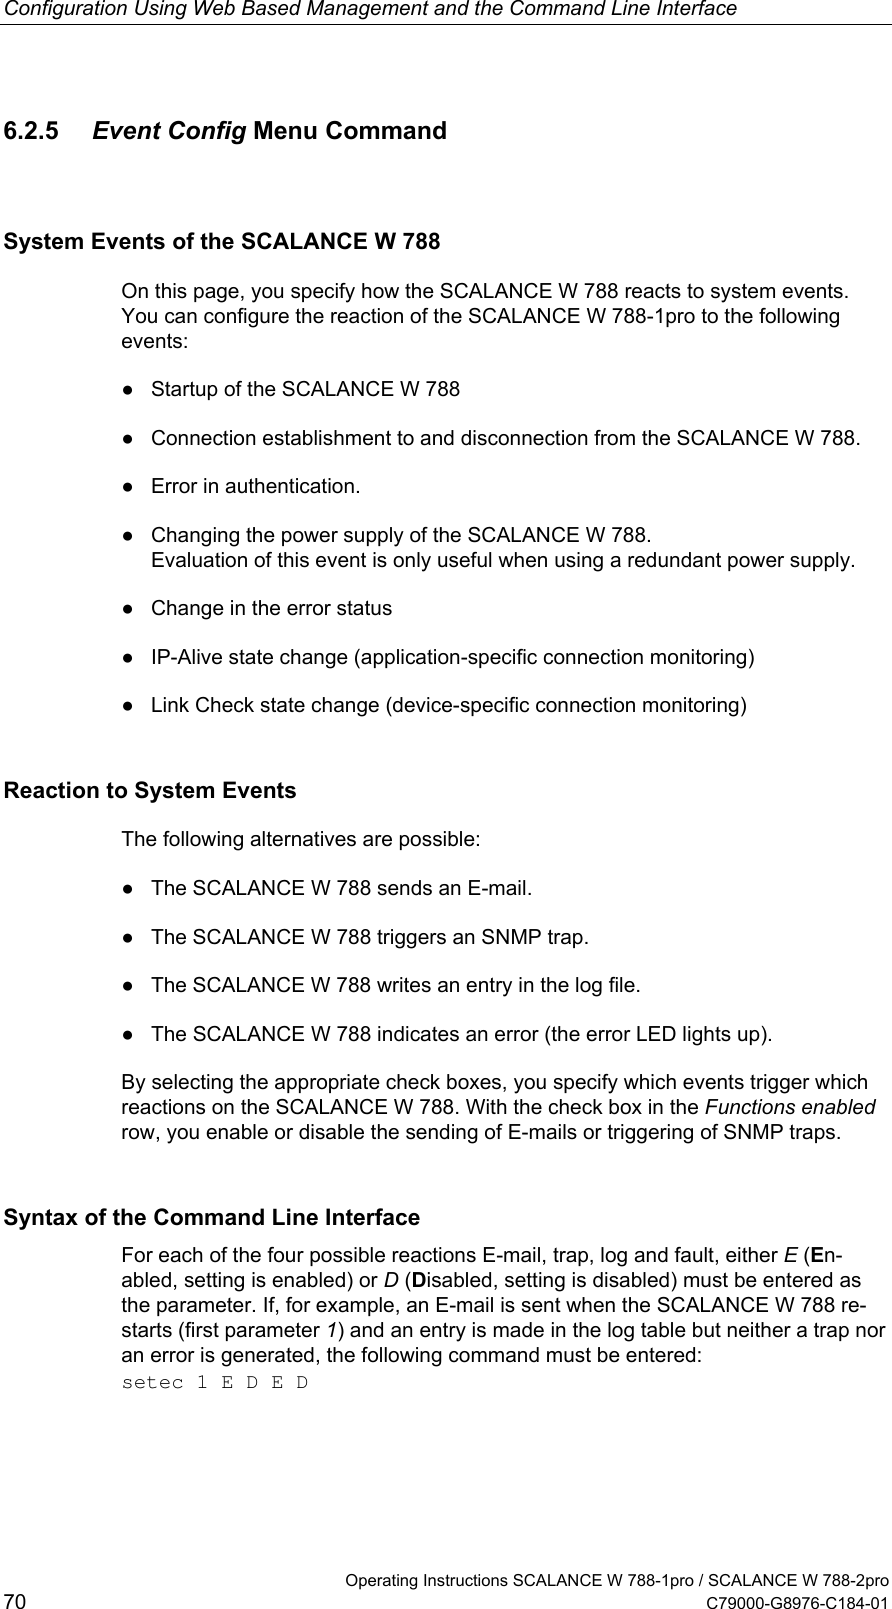 Configuration Using Web Based Management and the Command Line Interface 6.2.5  Event Config Menu Command  System Events of the SCALANCE W 788 On this page, you specify how the SCALANCE W 788 reacts to system events. You can configure the reaction of the SCALANCE W 788-1pro to the following events: ●  Startup of the SCALANCE W 788 ●  Connection establishment to and disconnection from the SCALANCE W 788. ●  Error in authentication. ●  Changing the power supply of the SCALANCE W 788. Evaluation of this event is only useful when using a redundant power supply. ●  Change in the error status ●  IP-Alive state change (application-specific connection monitoring) ●  Link Check state change (device-specific connection monitoring) Reaction to System Events The following alternatives are possible: ●  The SCALANCE W 788 sends an E-mail. ●  The SCALANCE W 788 triggers an SNMP trap. ●  The SCALANCE W 788 writes an entry in the log file. ●  The SCALANCE W 788 indicates an error (the error LED lights up). By selecting the appropriate check boxes, you specify which events trigger which reactions on the SCALANCE W 788. With the check box in the Functions enabled row, you enable or disable the sending of E-mails or triggering of SNMP traps. Syntax of the Command Line Interface For each of the four possible reactions E-mail, trap, log and fault, either E (En-abled, setting is enabled) or D (Disabled, setting is disabled) must be entered as the parameter. If, for example, an E-mail is sent when the SCALANCE W 788 re-starts (first parameter 1) and an entry is made in the log table but neither a trap nor an error is generated, the following command must be entered: setec 1 E D E D   Operating Instructions SCALANCE W 788-1pro / SCALANCE W 788-2pro 70  C79000-G8976-C184-01 